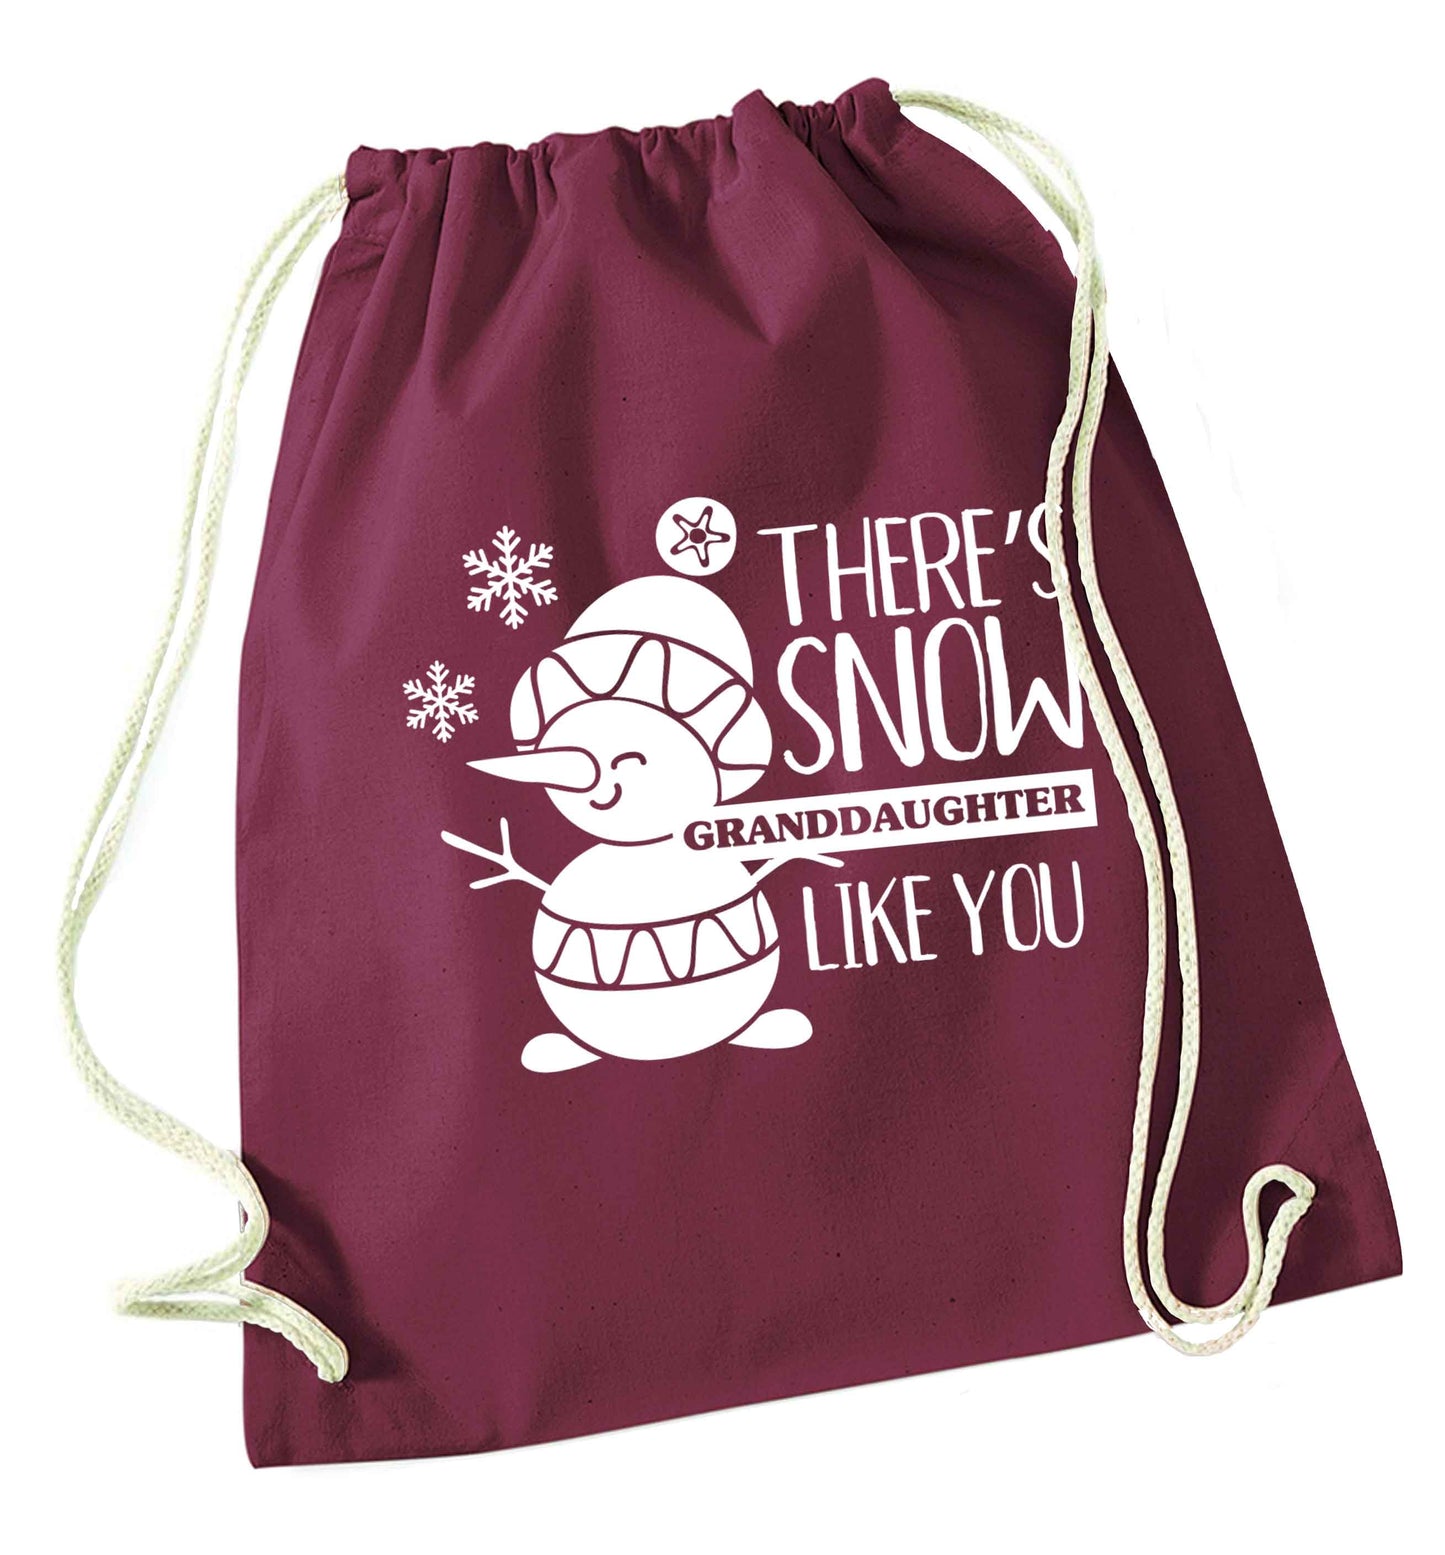 There's snow granddaughter like you maroon drawstring bag